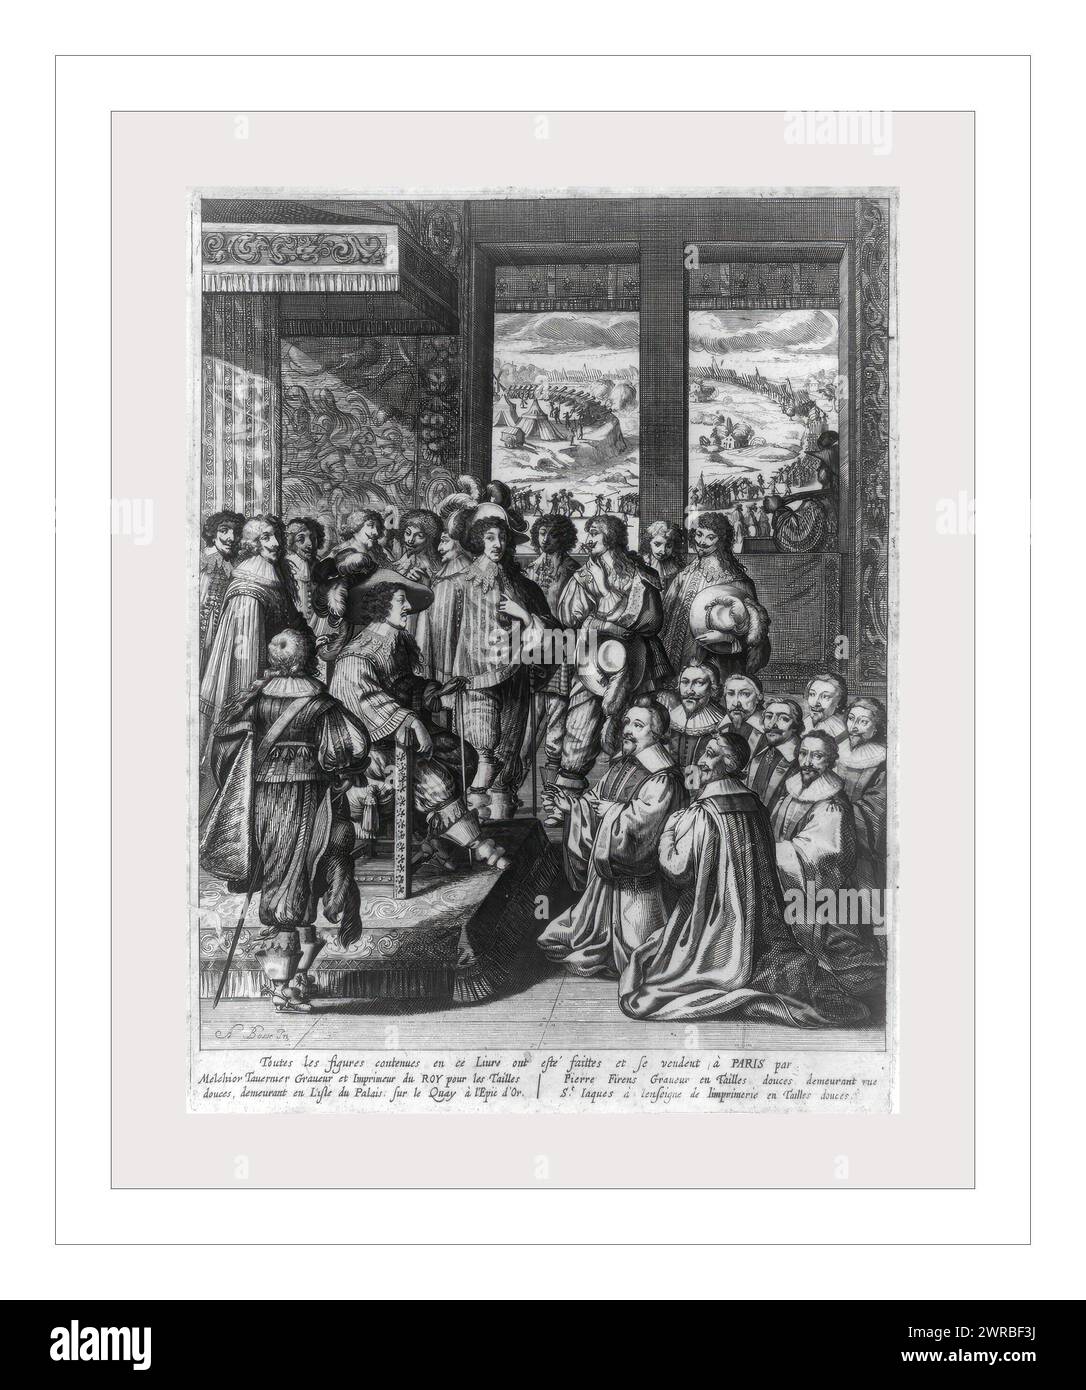 The king giving the accolade, A. Bosse in., Print shows the Louis XIII sitting on the throne with eight men kneeling before him; scene through windows shows fortifications with cannons, bell tents, and soldiers in formation., Bosse, Abraham, 1602-1676, artist, 1633?, Louis, XIII, King of France, 1601-1643, Engravings, 1630-1640., Engravings, 1630-1640, 1 print: engraving, 31.4 x 24.1 cm (sheet Stock Photo